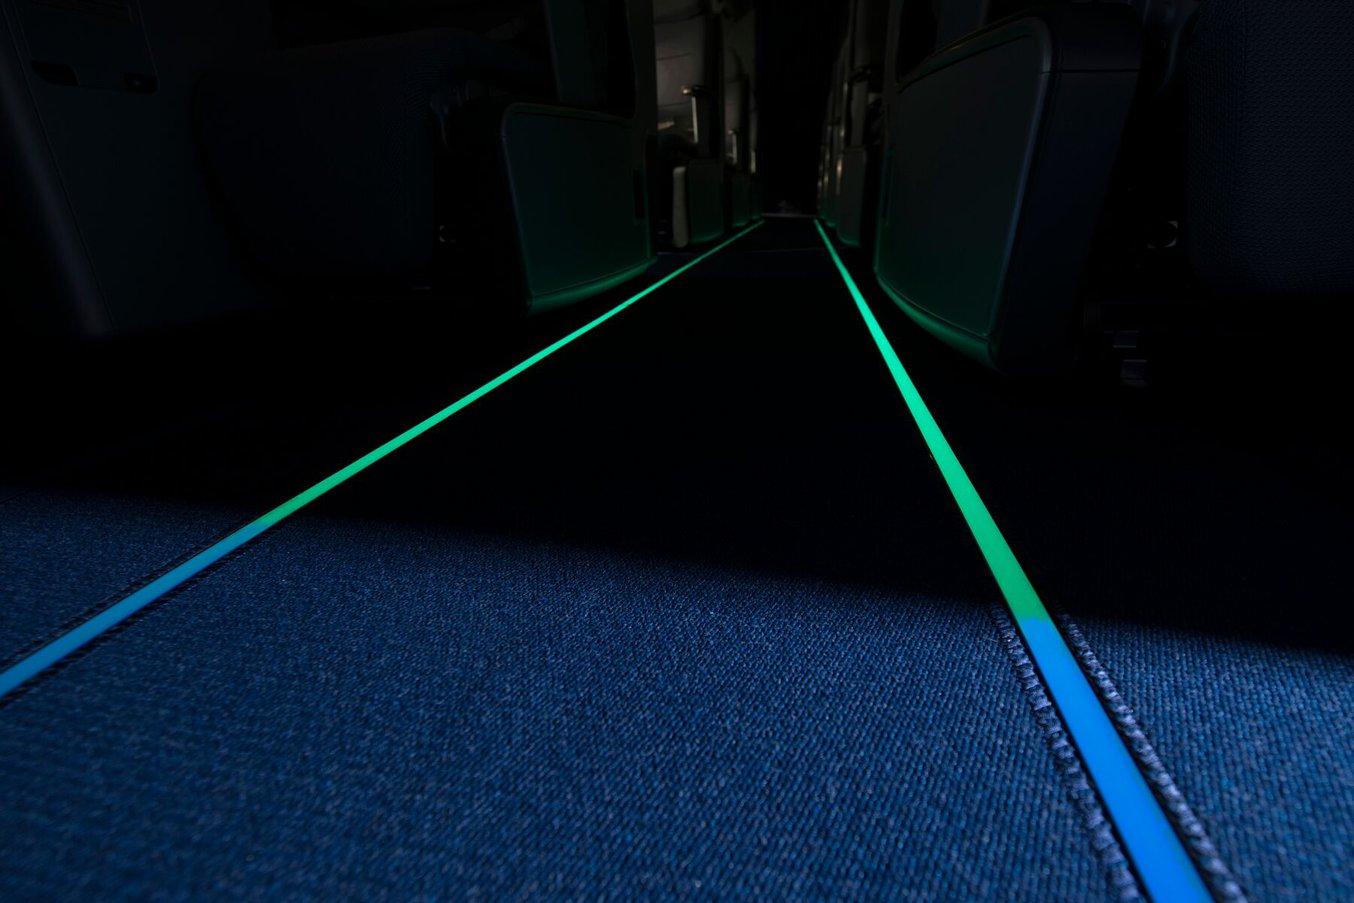 View of a darkened airplane interior with blue and green luminescent escape route markings.